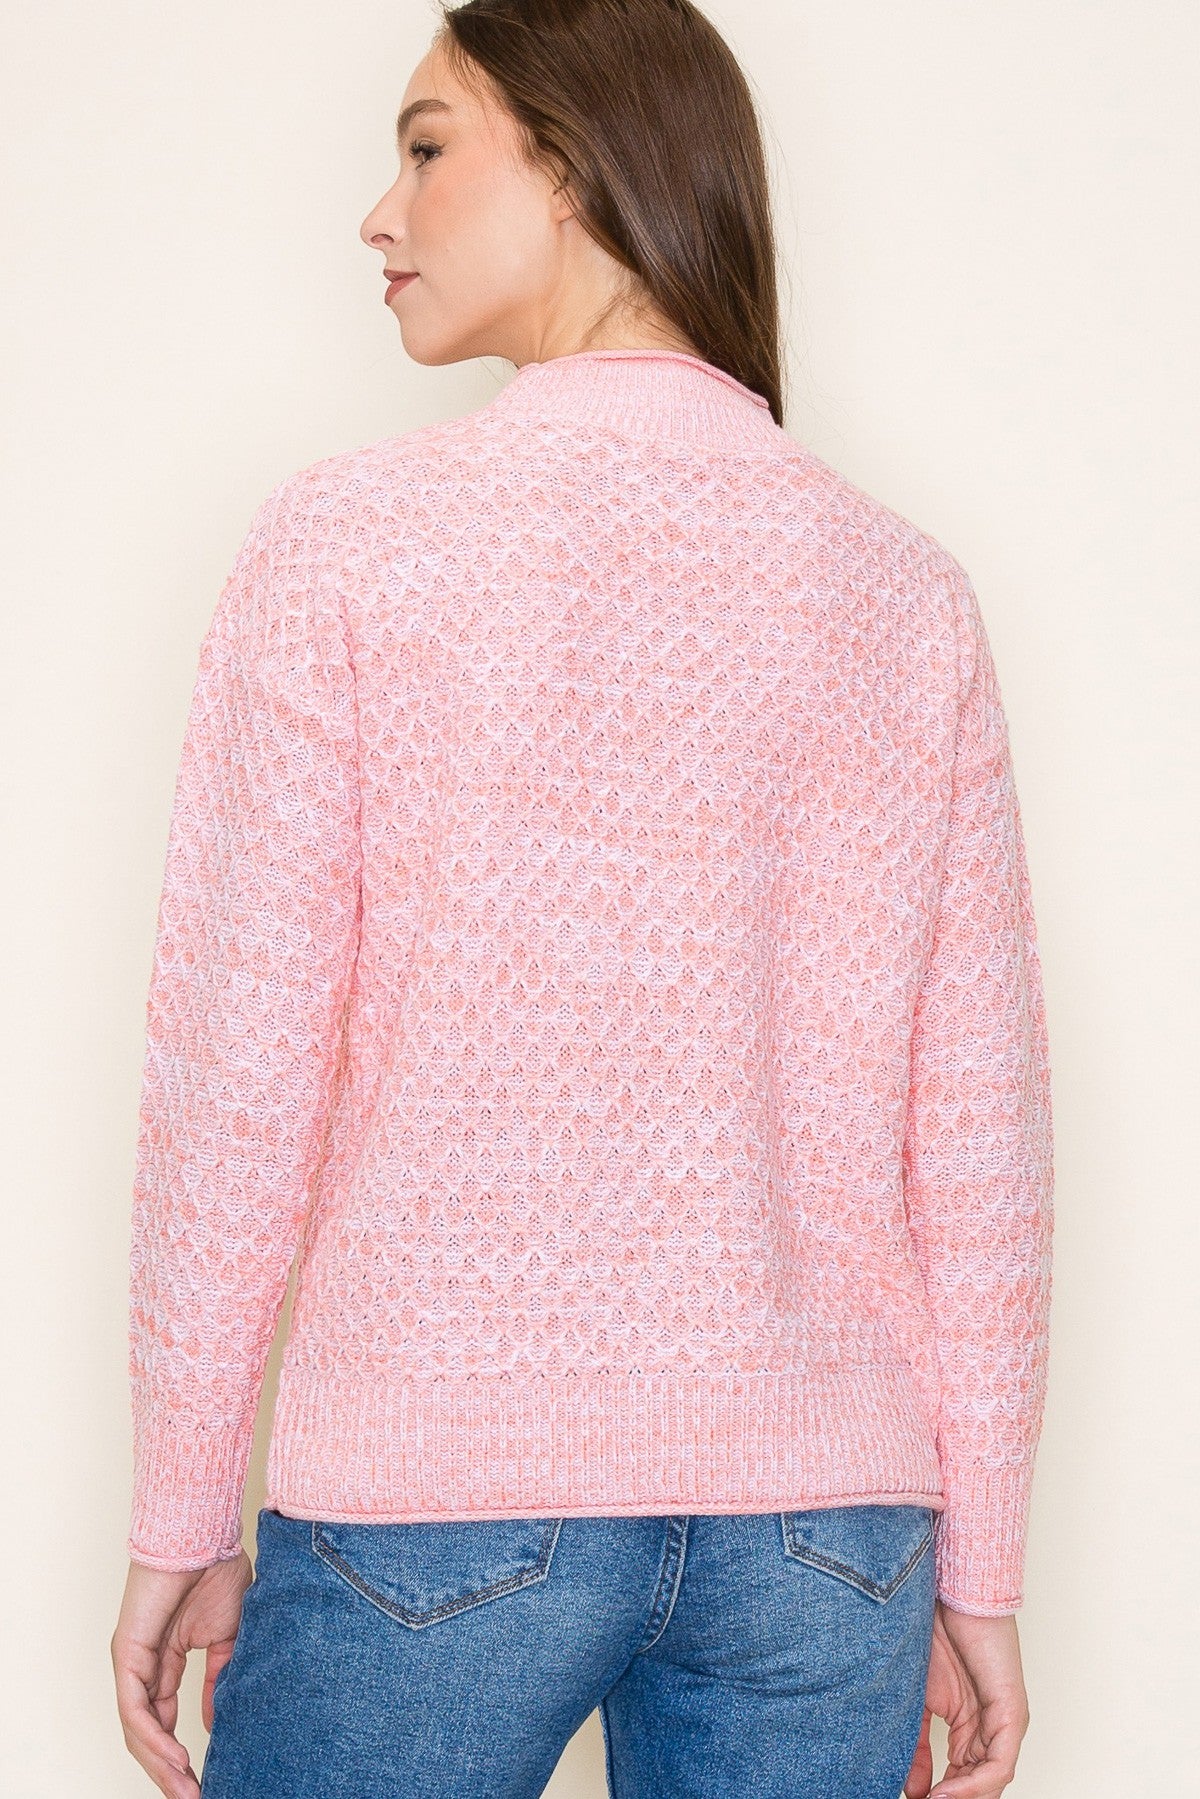 CORAL 2 TONE MIXED YARN MOCK NECK PULLOVER SWEATER FINAL SALE